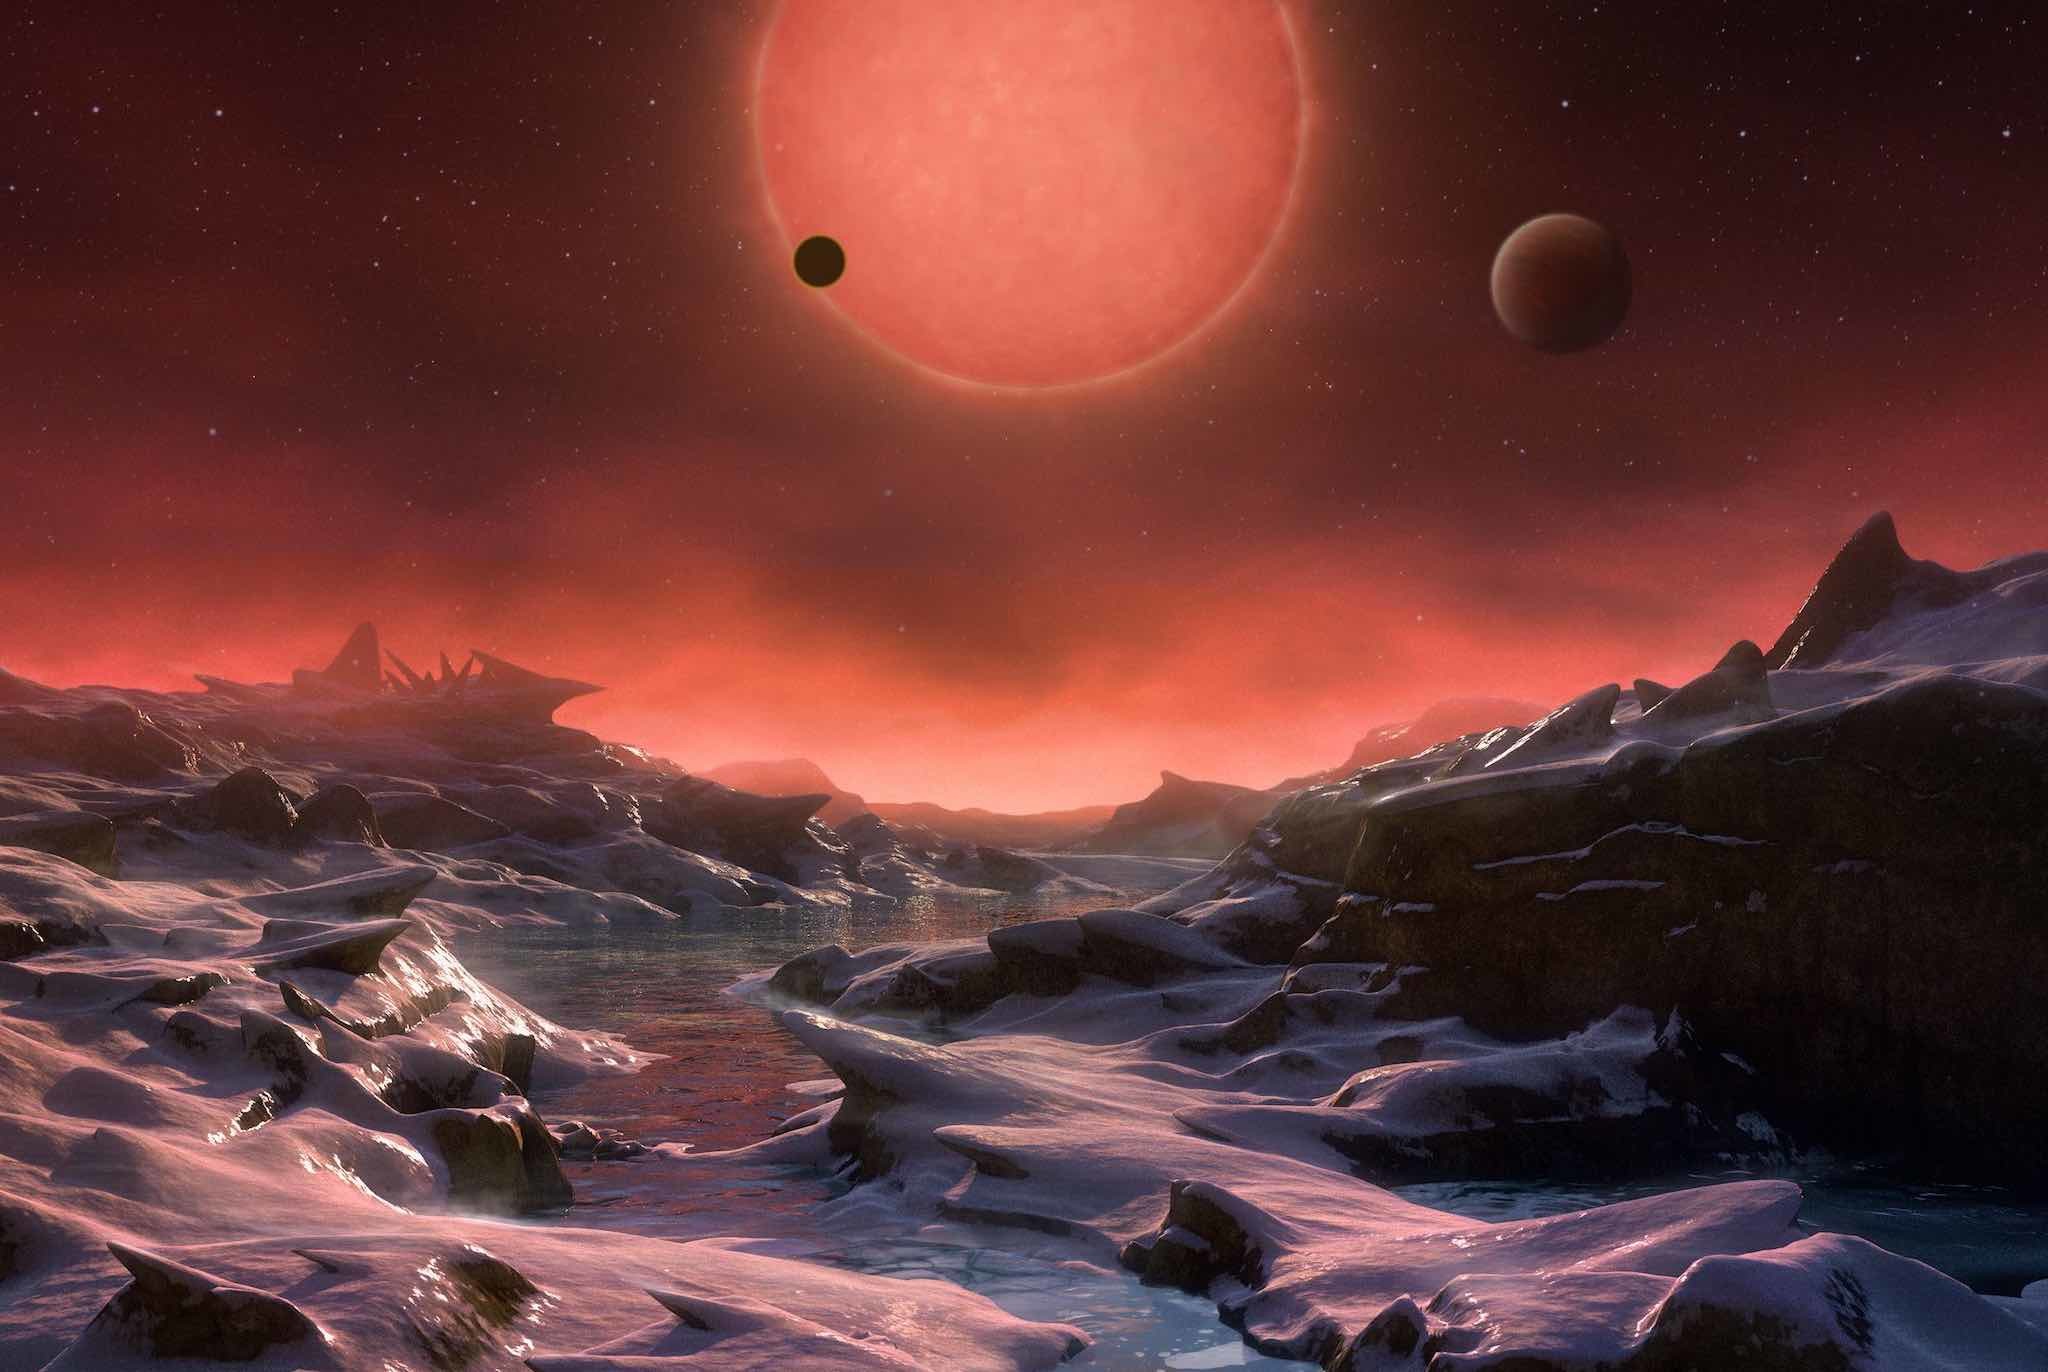 https://fsmedia.imgix.net/a9/3e/f7/2f/3b96/484b/9e0d/812dff1ada39/a-rendition-of-the-view-from-one-of-trappist-1s-planets.jpeg